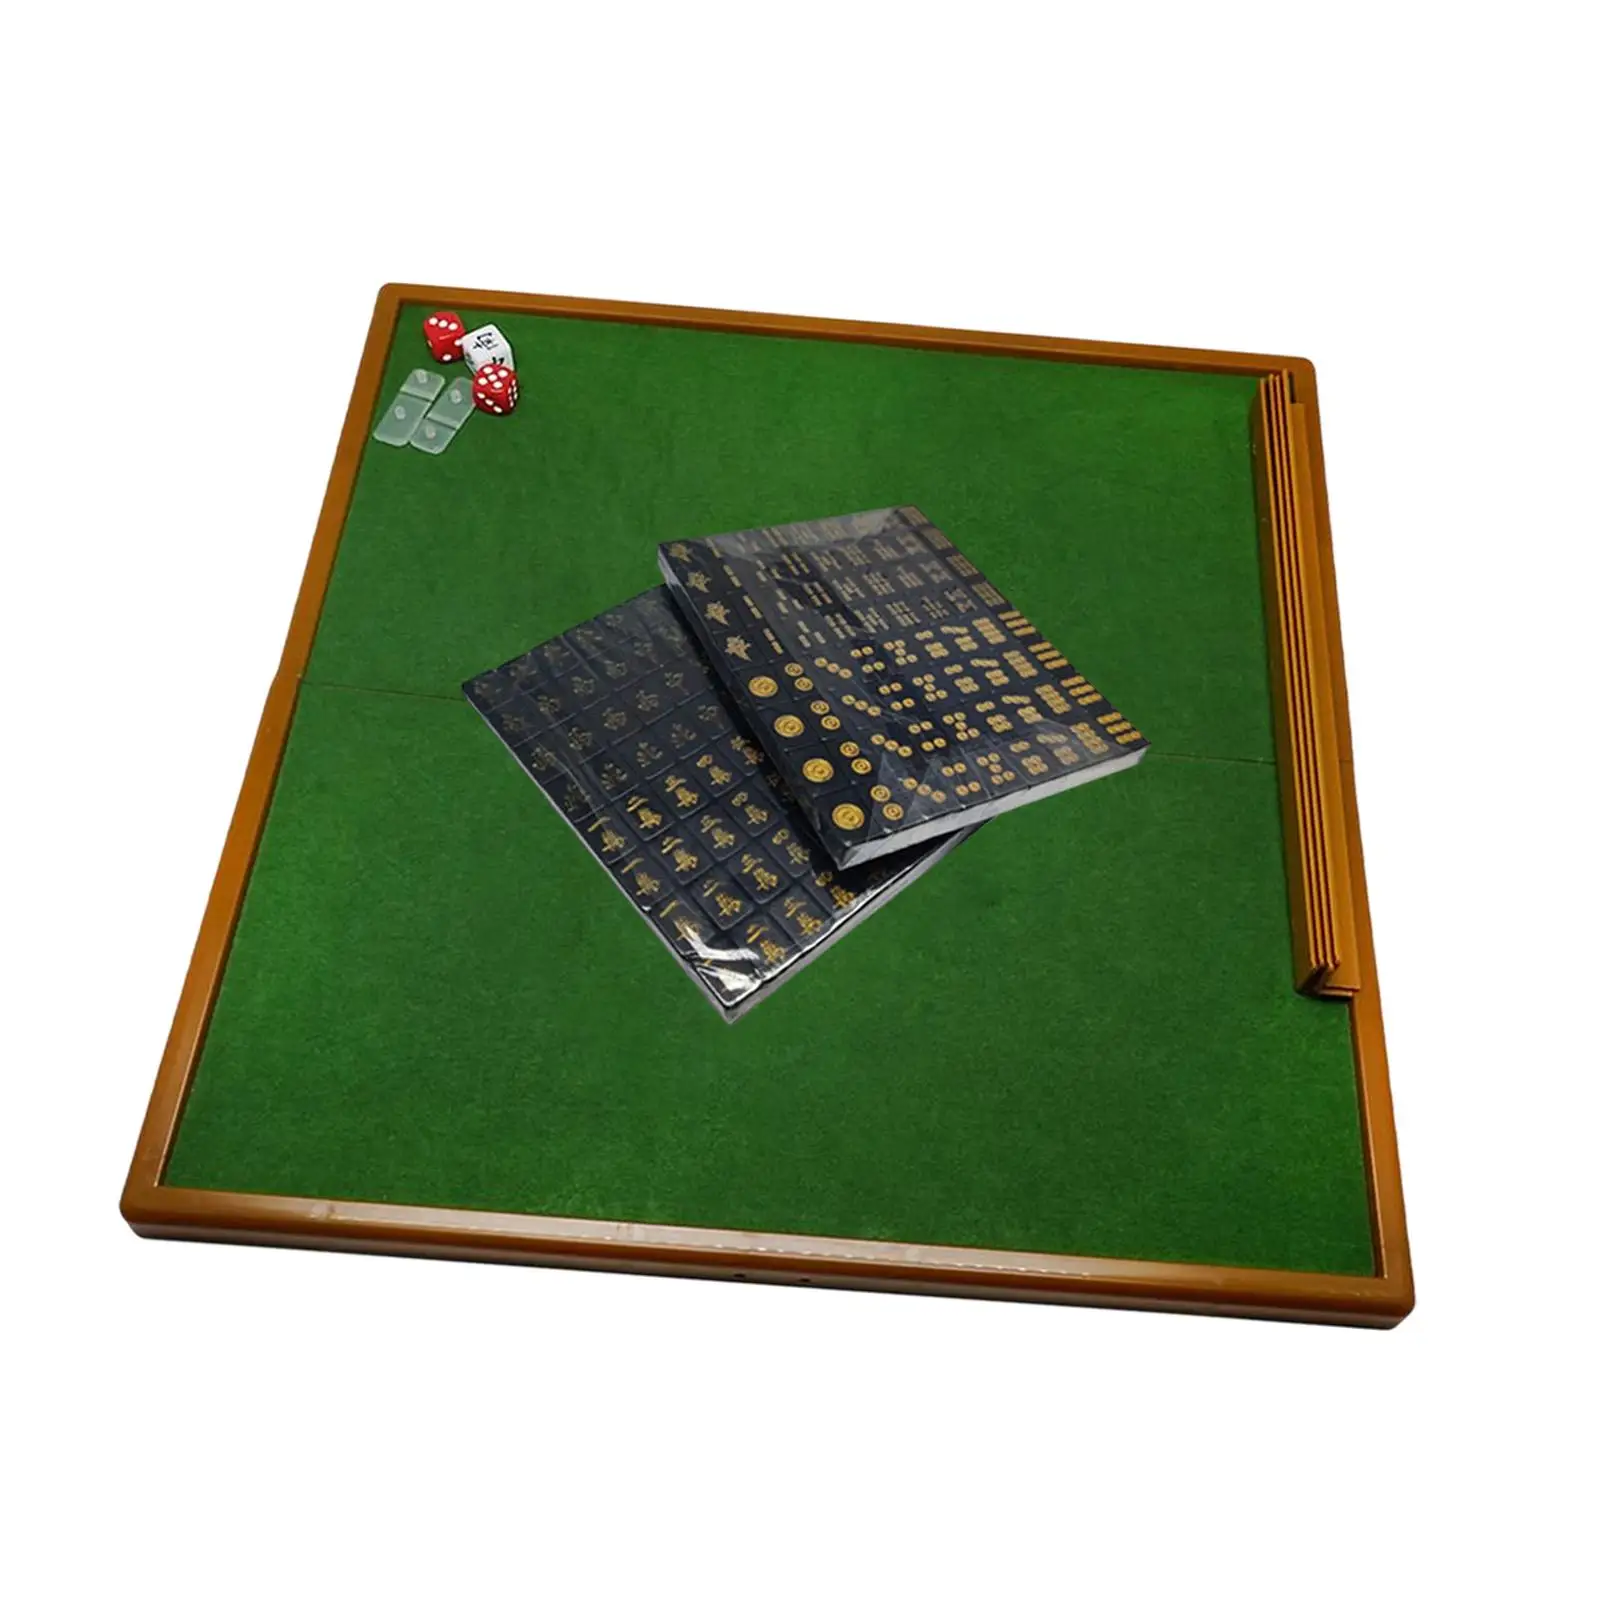 Chinese Mahjong Game Set, and Dices Tile Rulers Board Game Mini Mahjong Set with Folding Mahjong Table for Travel Home Party